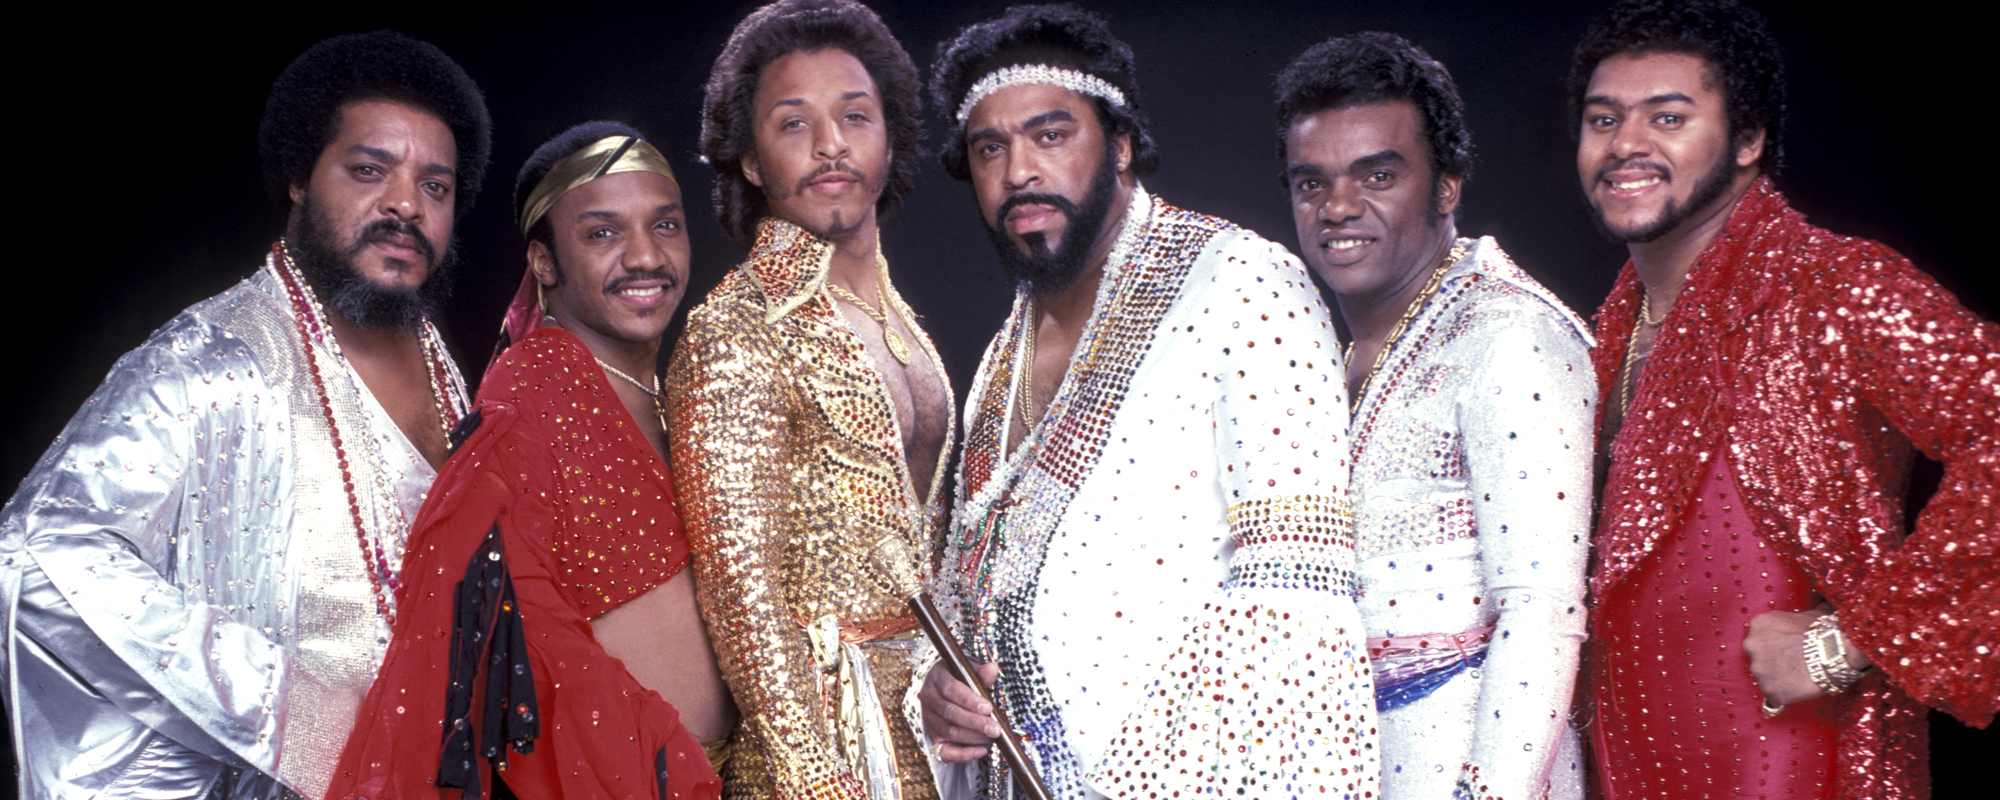 5 Successful Covers of Songs Performed by The Isley Brothers